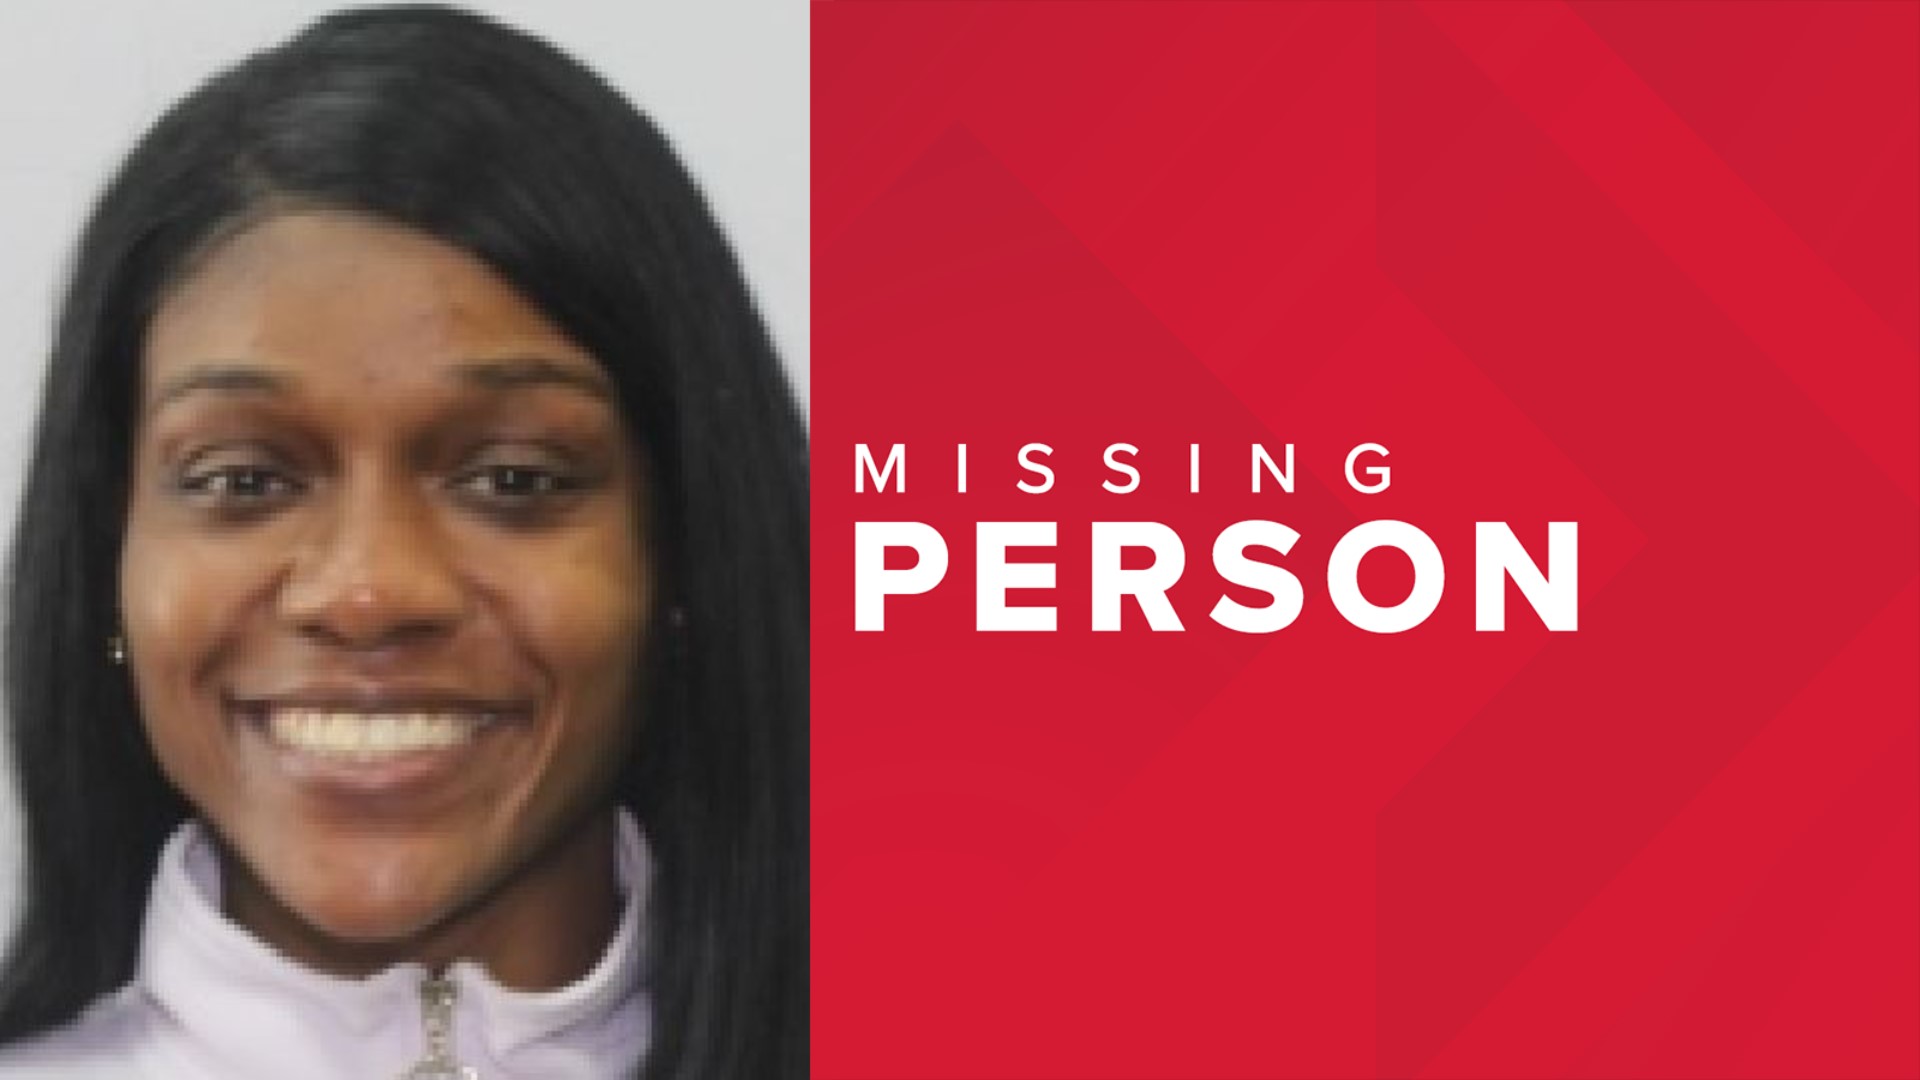 27-year-old Rajih McQueen has not been seen or hear from since the week of June 20.